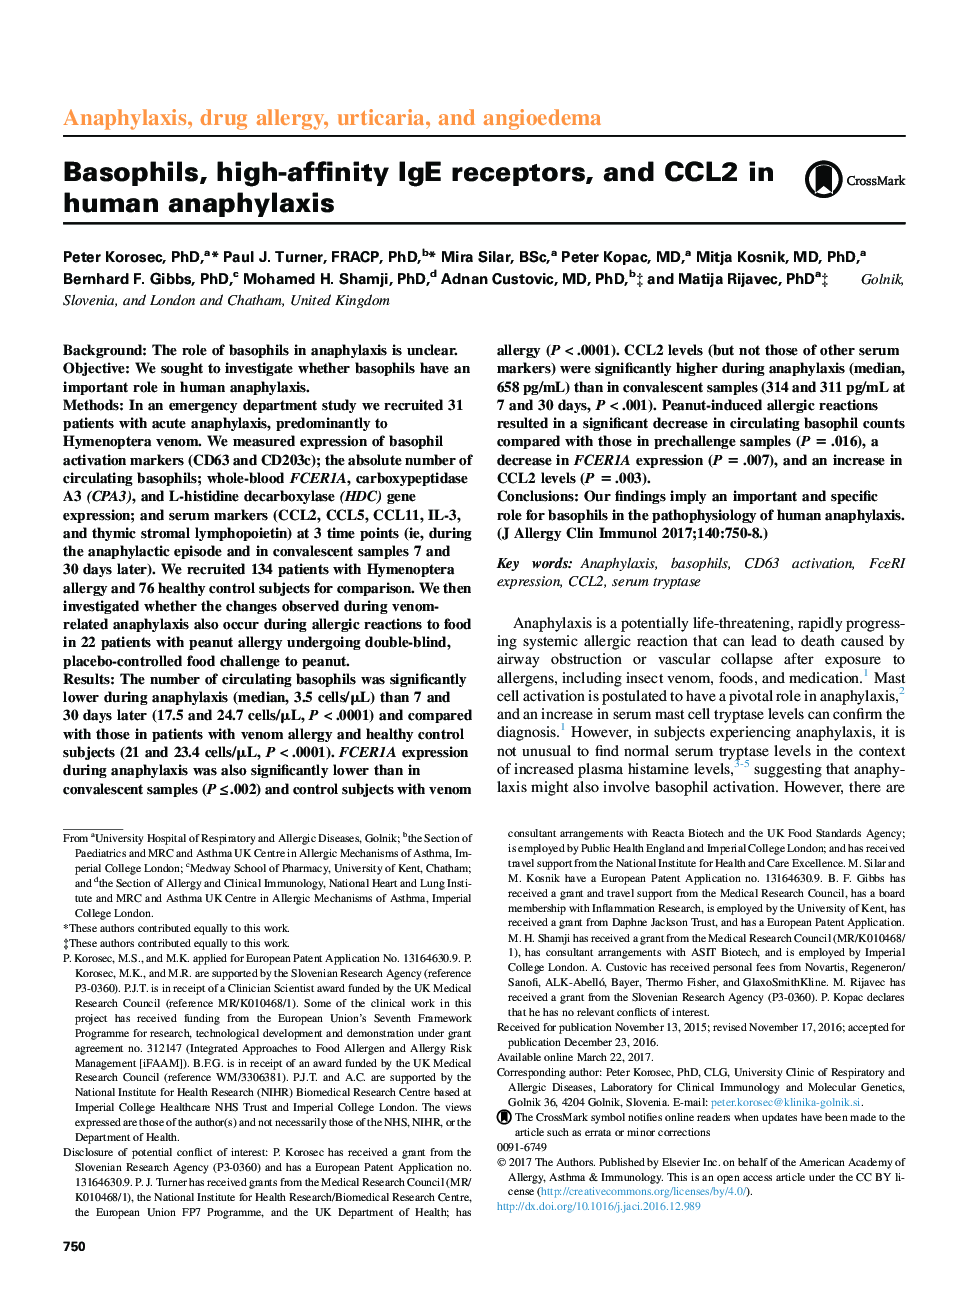 Basophils, high-affinity IgE receptors, and CCL2 in human anaphylaxis